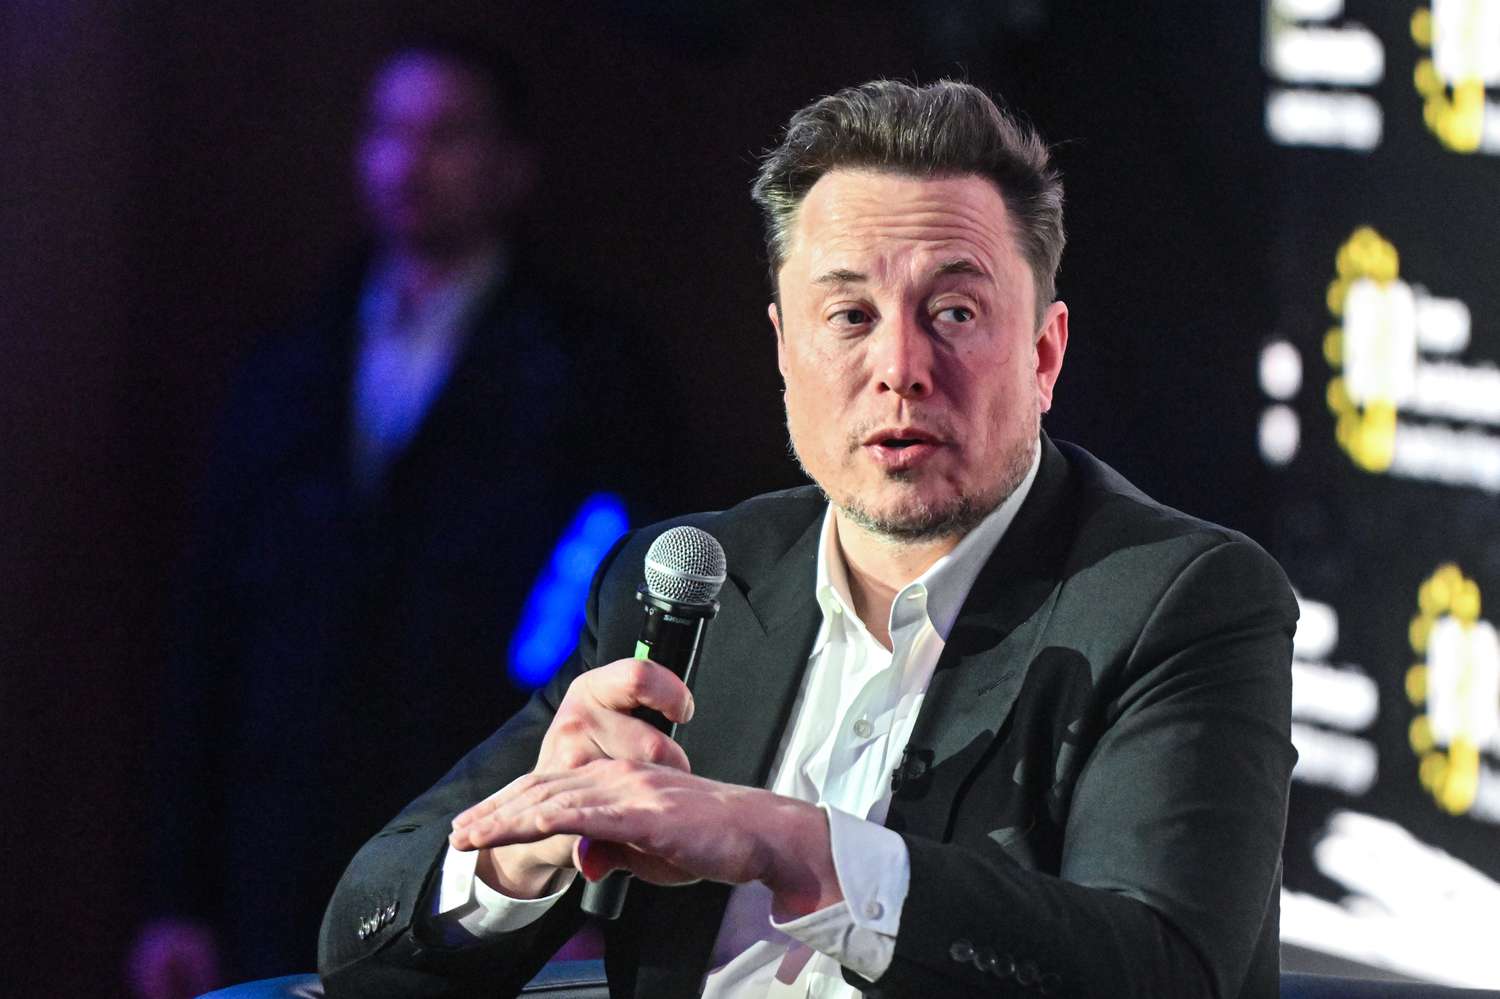 4 Key Takeaways From Elon Musk’s Comments During Tesla’s Q1 Earnings Call [Video]